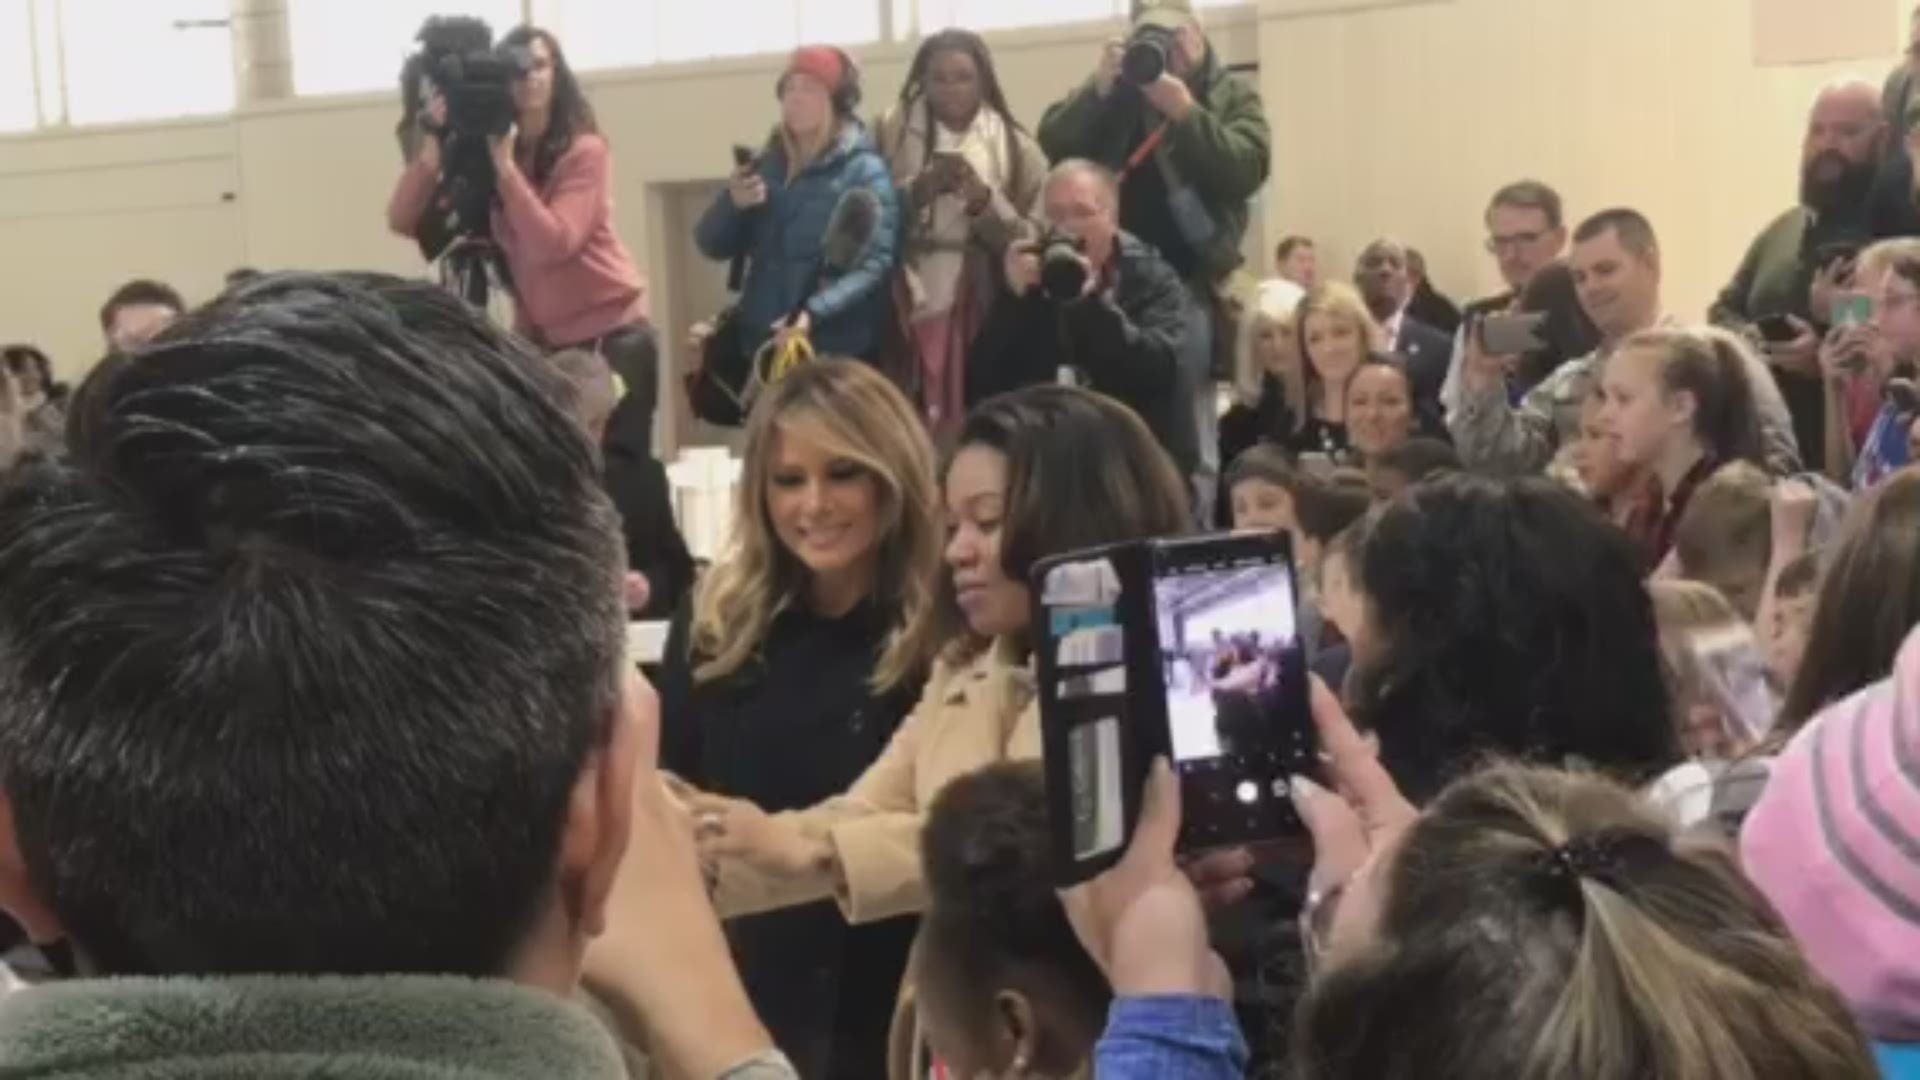 First Lady Melania Trump spent time with soldiers, airmen, and school children during her visit to Joint Base Langley-Eustis on December 12, 2018.